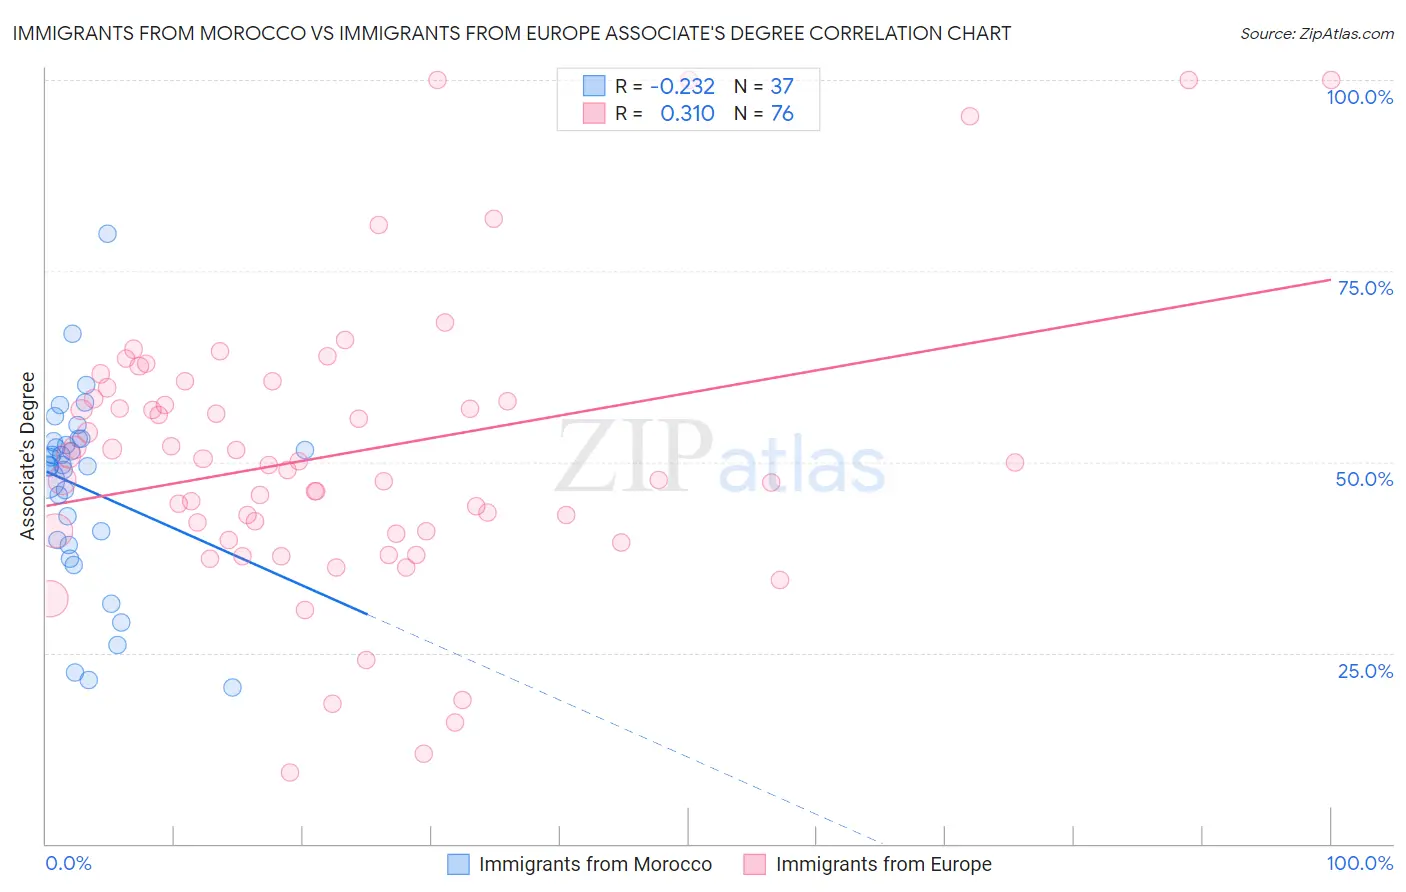 Immigrants from Morocco vs Immigrants from Europe Associate's Degree